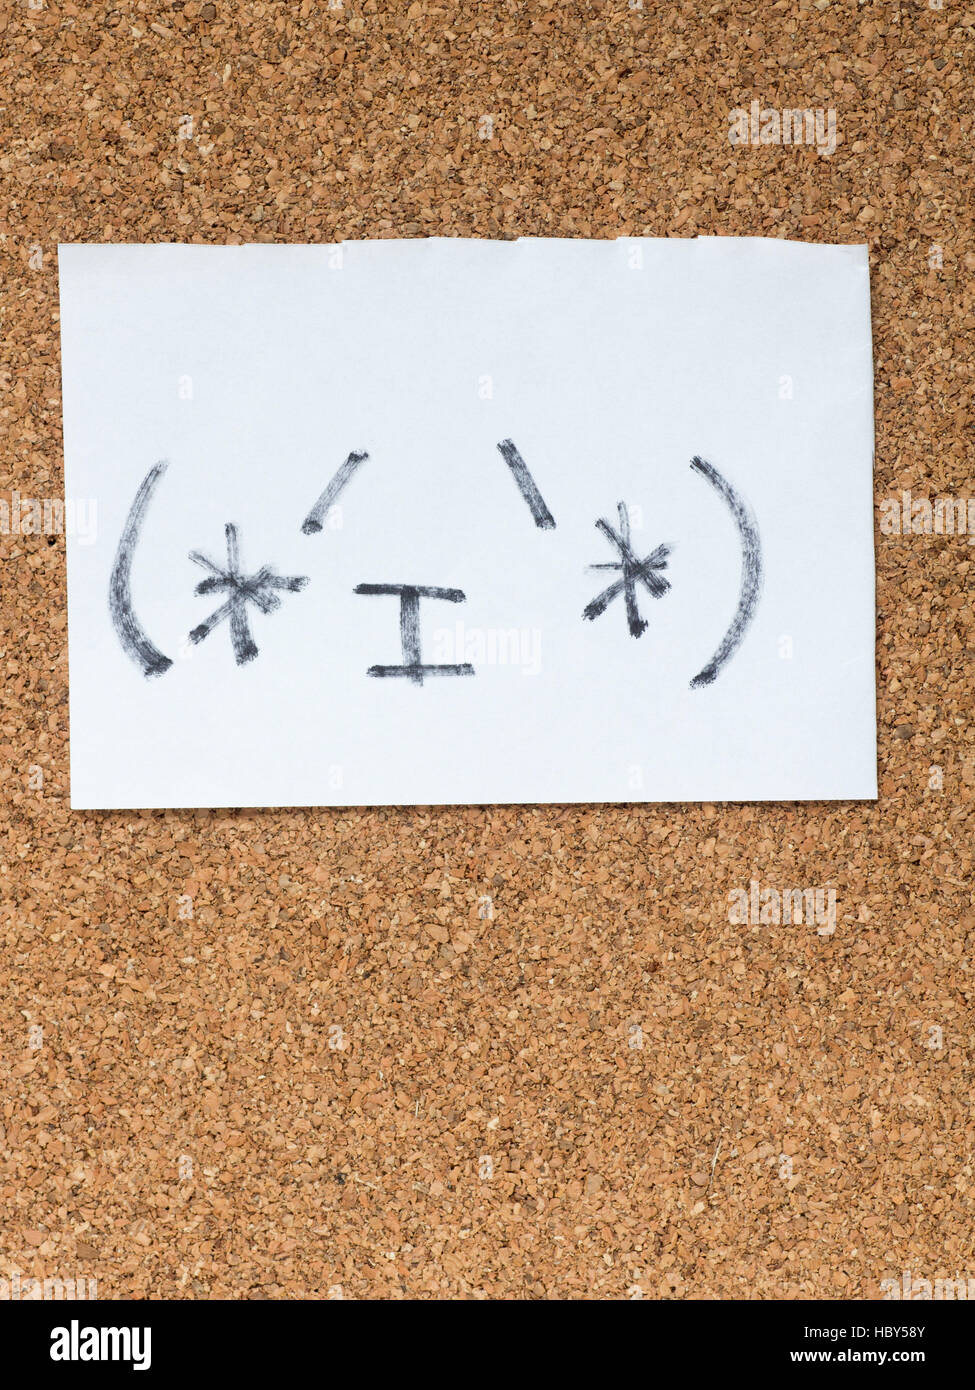 The series of Japanese emoticons called Kaomoji on the cork board, content Stock Photo